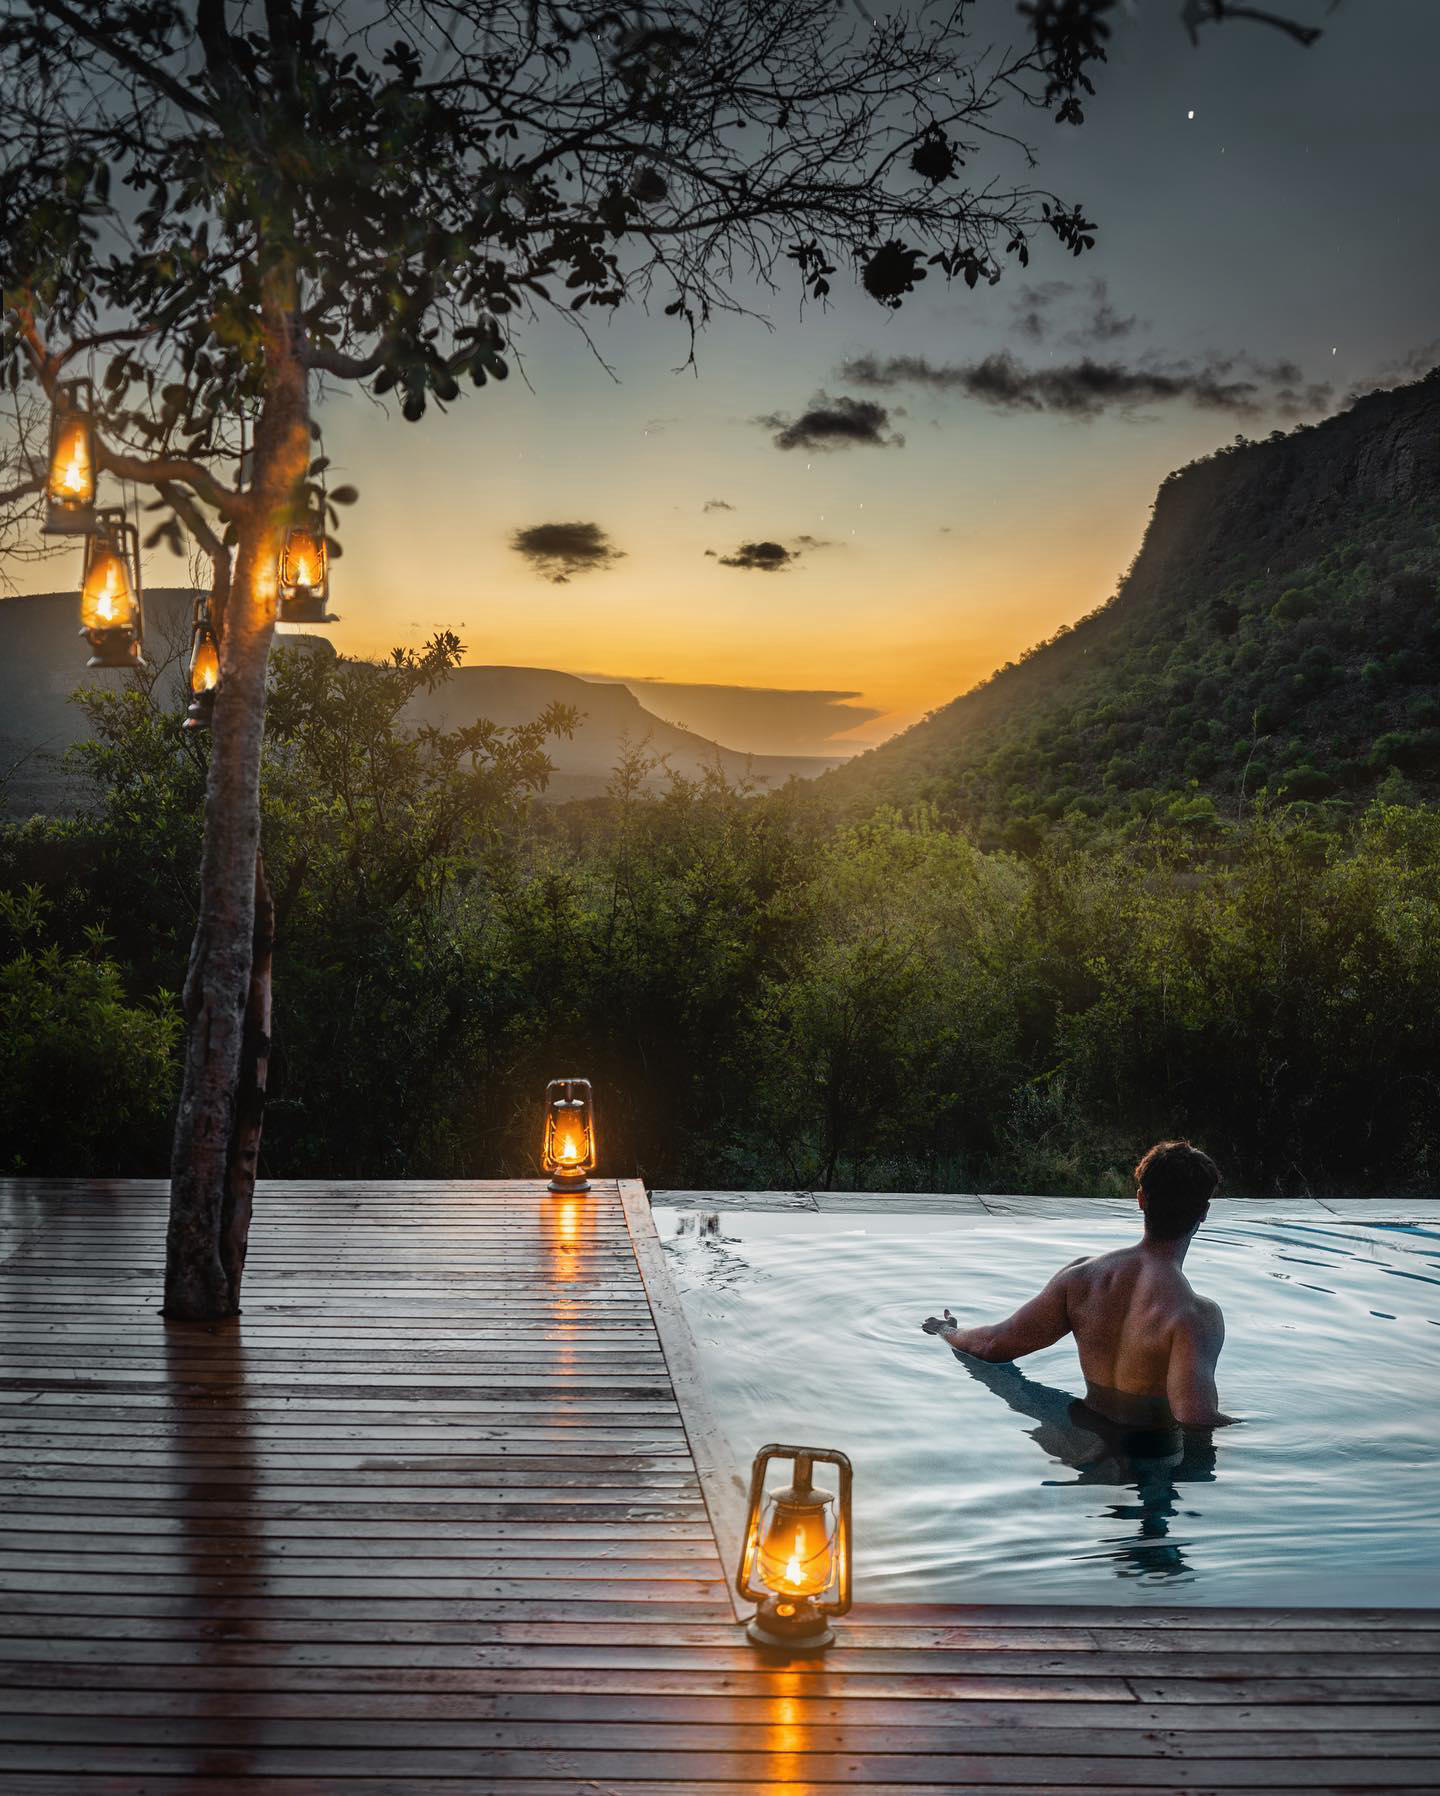 image  1 Dr.Ali Alsulaiman - The magnificent view from the infinity pool at Mountain Lodge #maratabaluxurylod